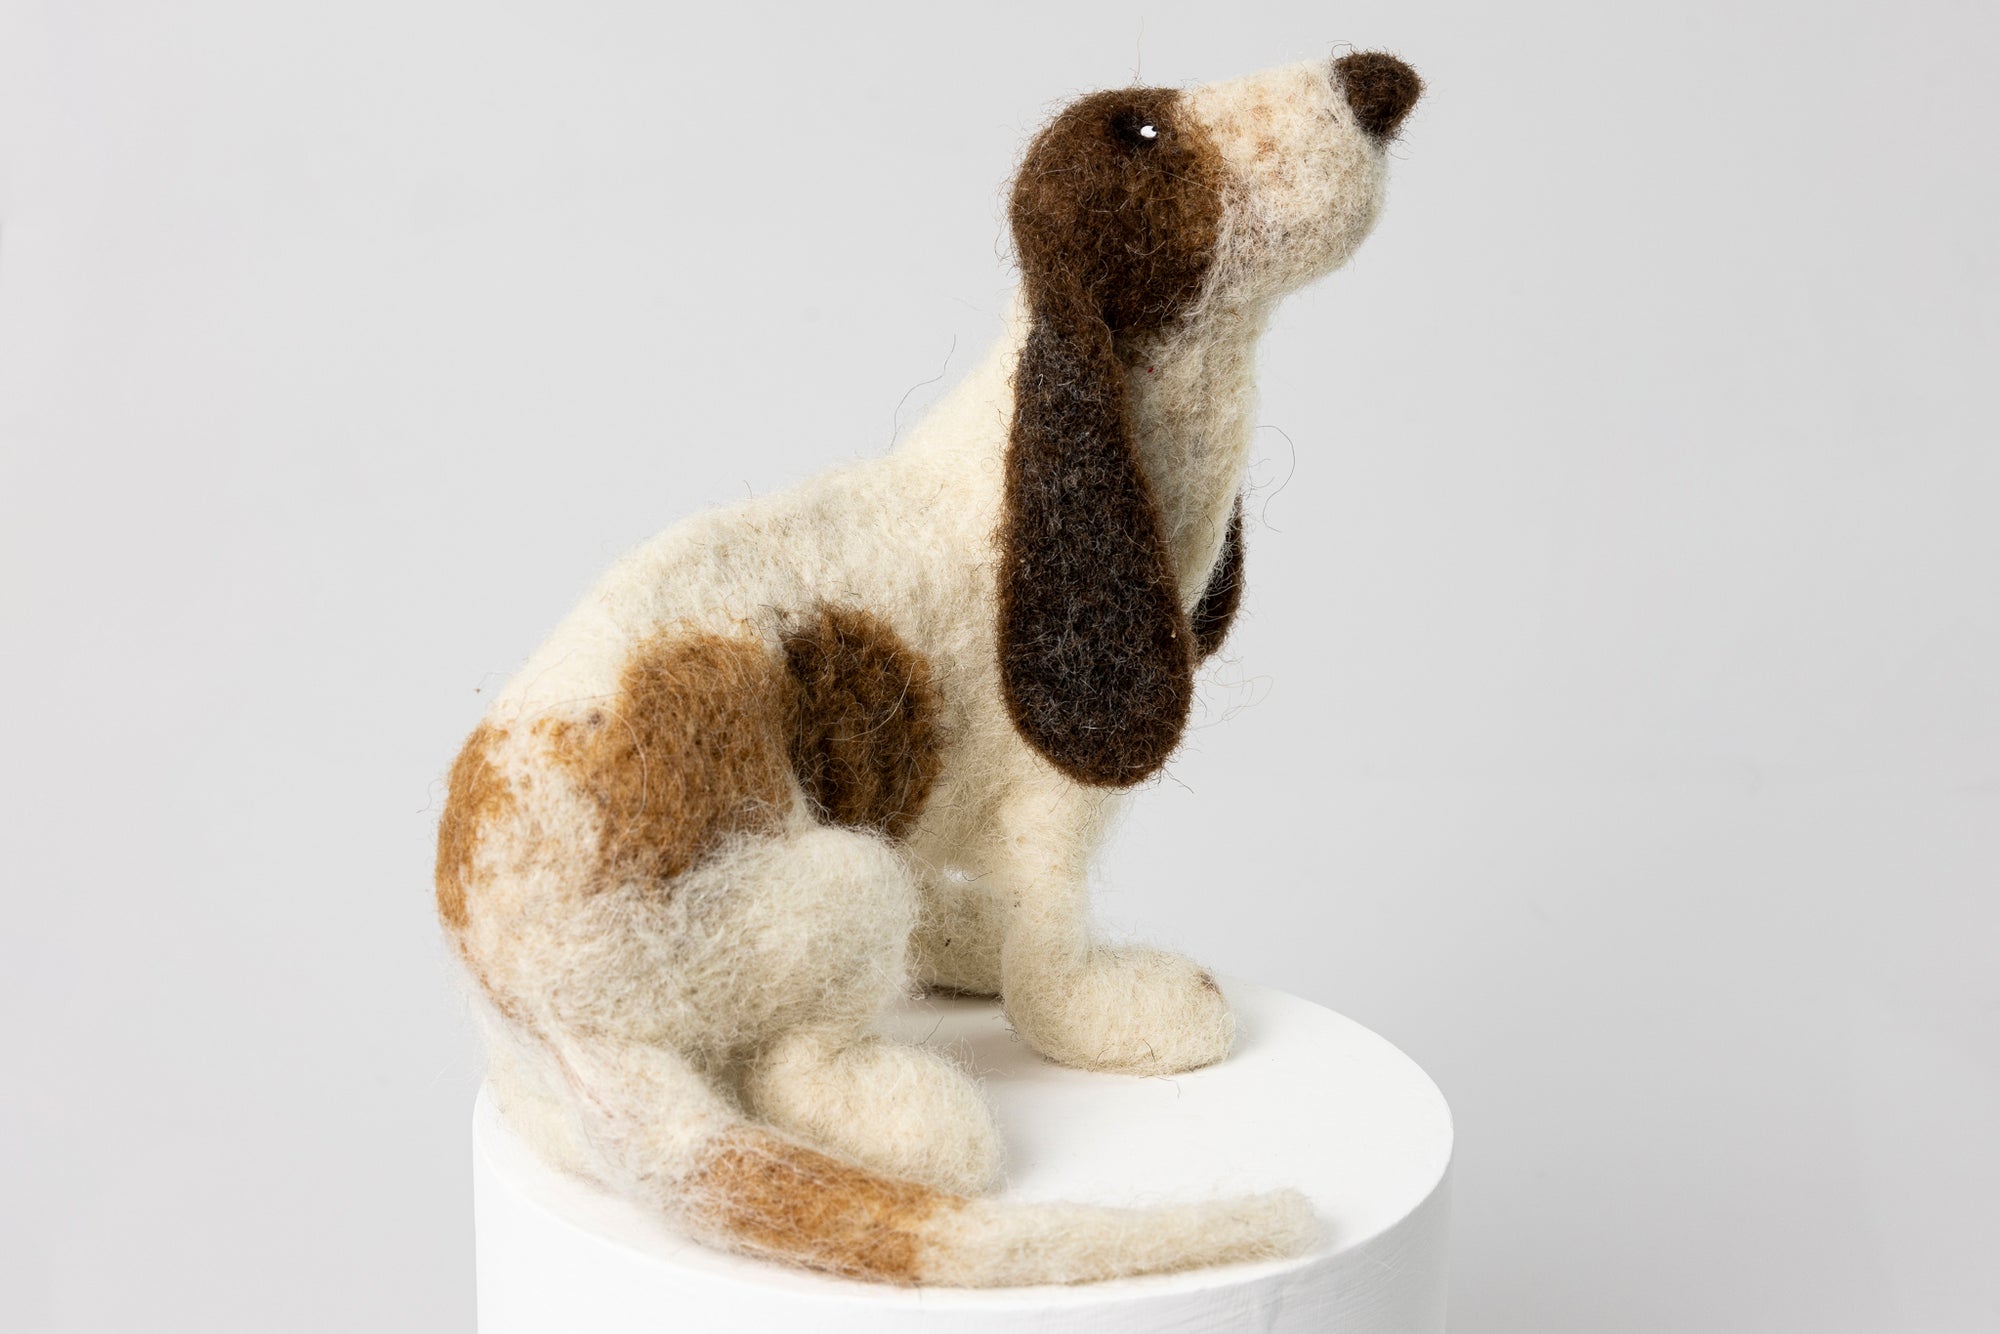 'Jarvis' needlefelt character dog by Kate Toms, available at Padstow Gallery, Cornwall